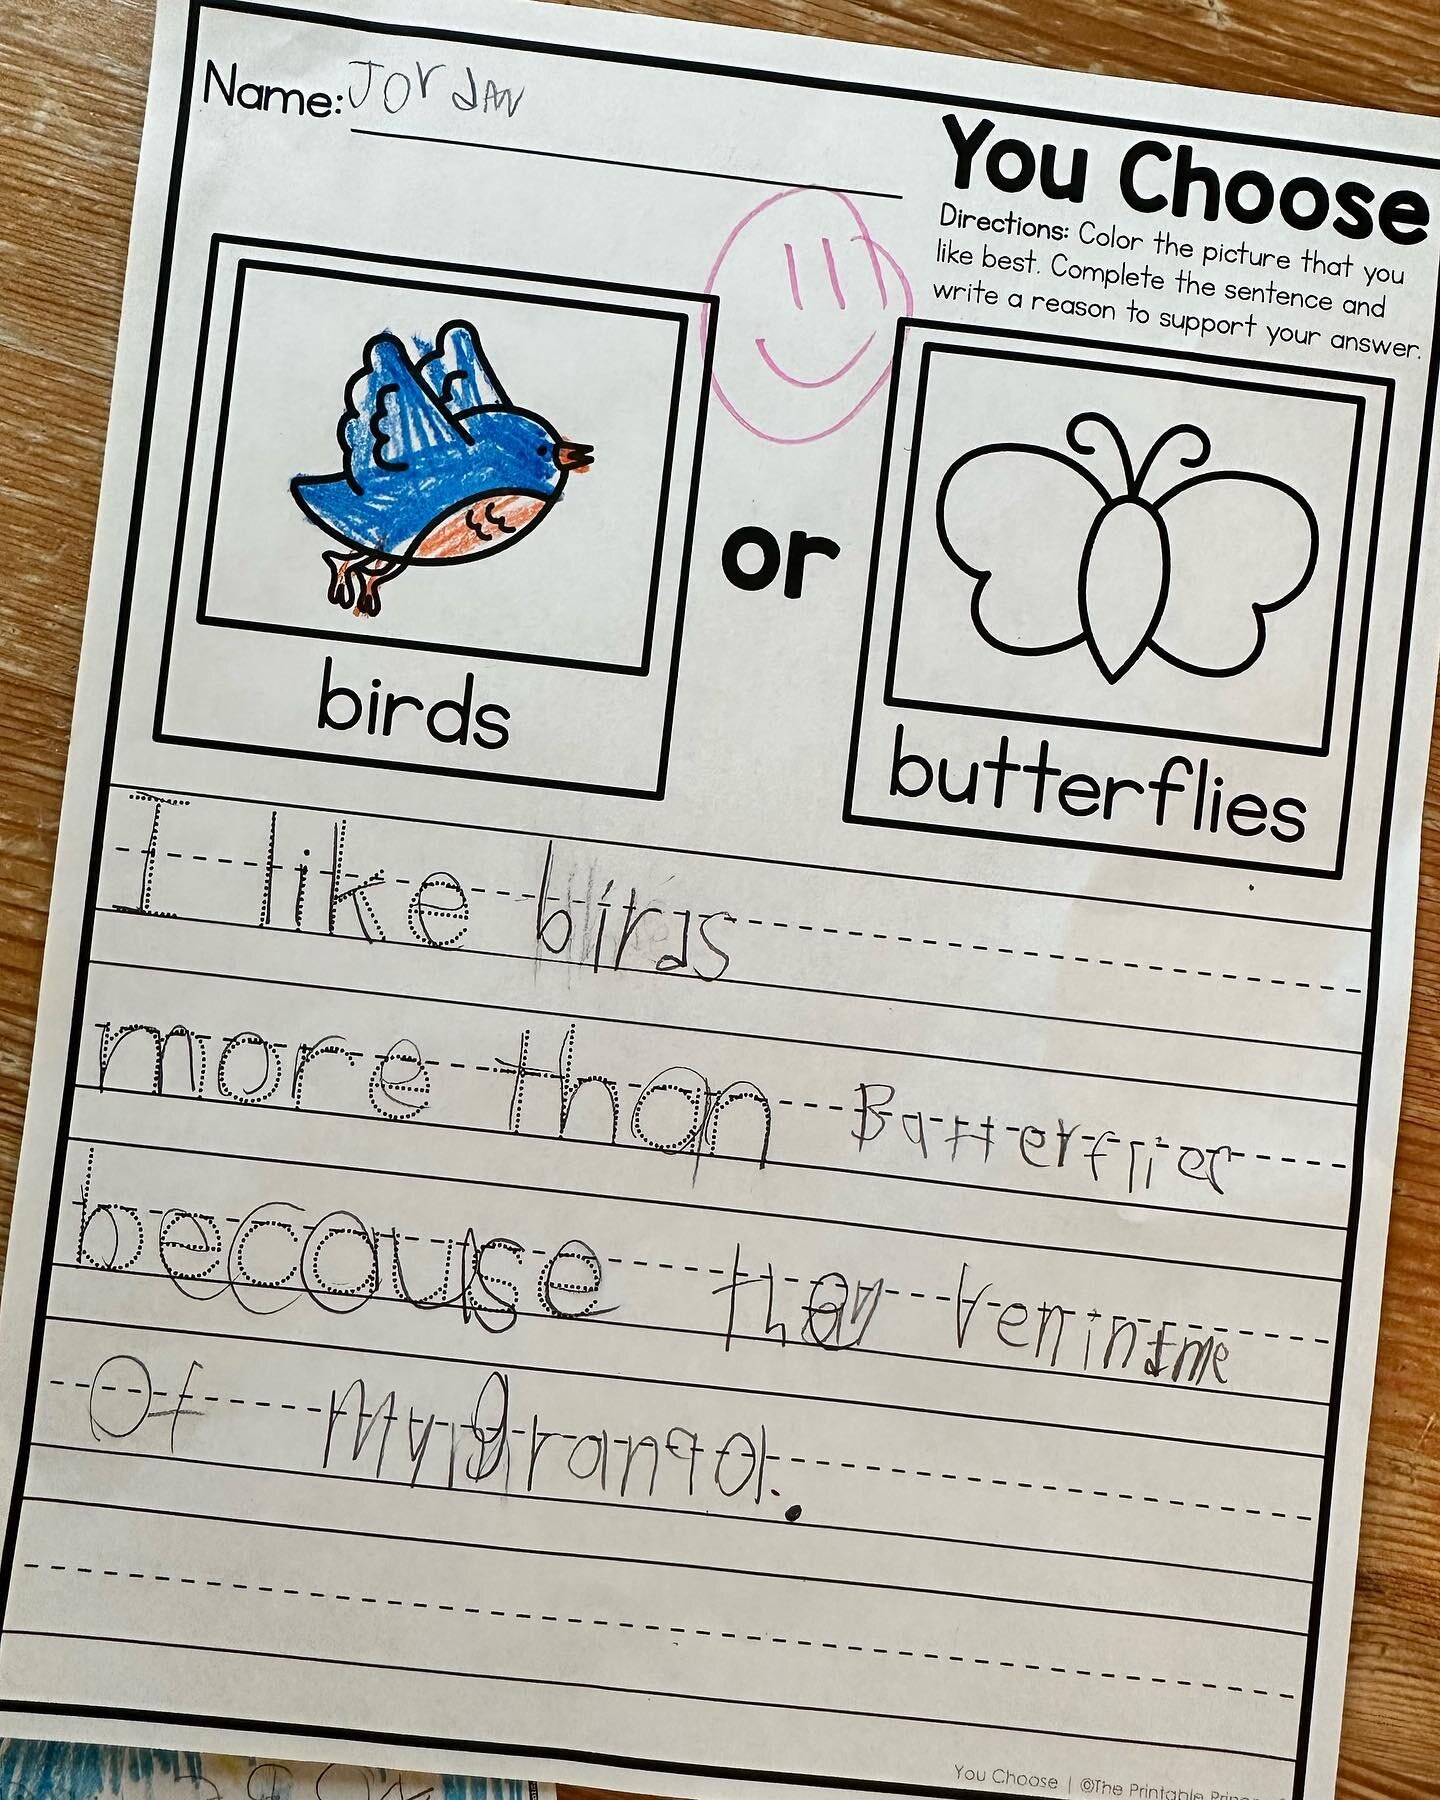 &ldquo;I like birds more than butterflies because they remind me of my grandpa.&rdquo; ❤️🙏🏻